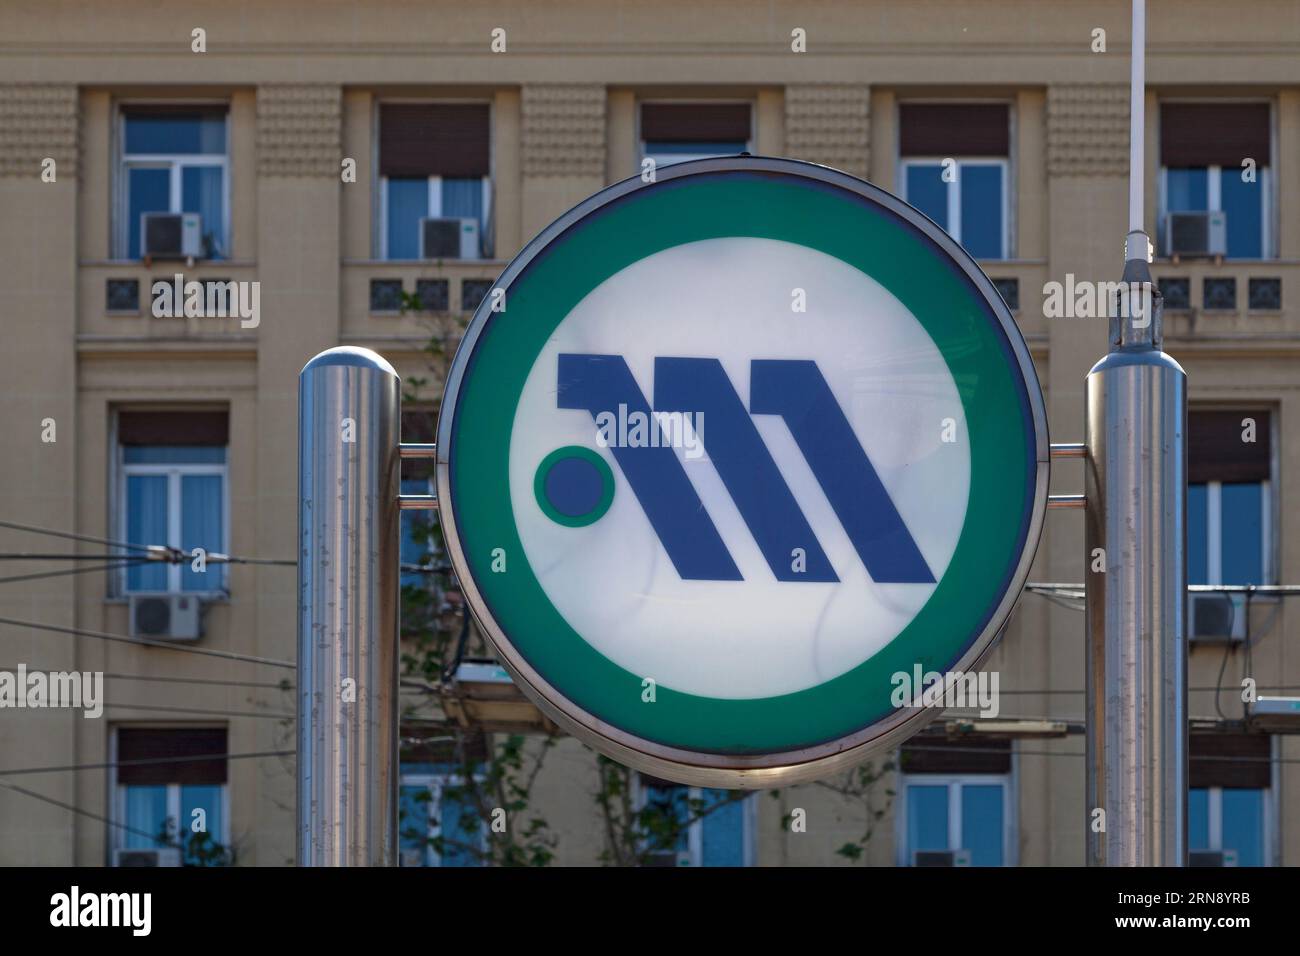 Athens, Greece - April 29 2019: Sign of the Athens Metro (Greek: Μετρό Αθήνας, Metró Athínas), a rapid-transit system which serves the Athens conurbat Stock Photo